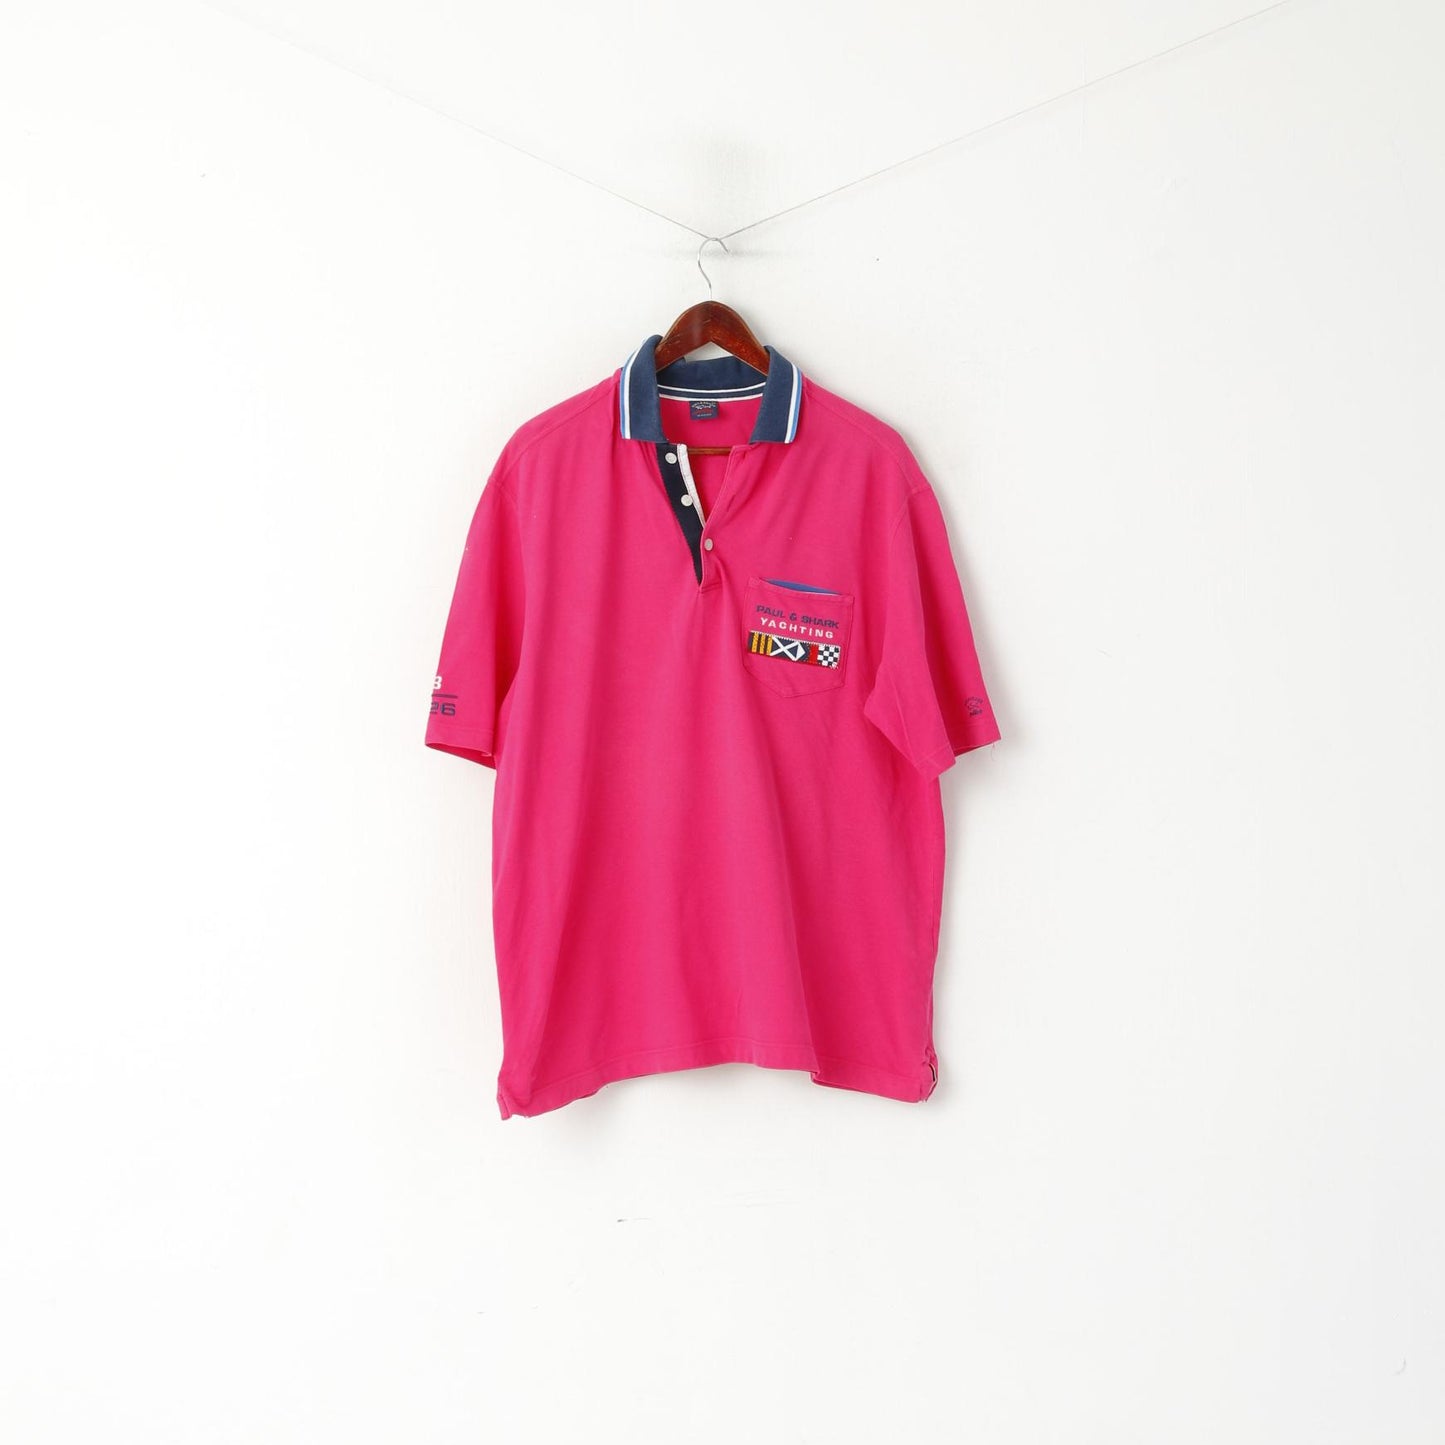 Paul &amp; Shark Hommes 2XL Polo Rose Coton Newport Sydney World Yachting Cup Top